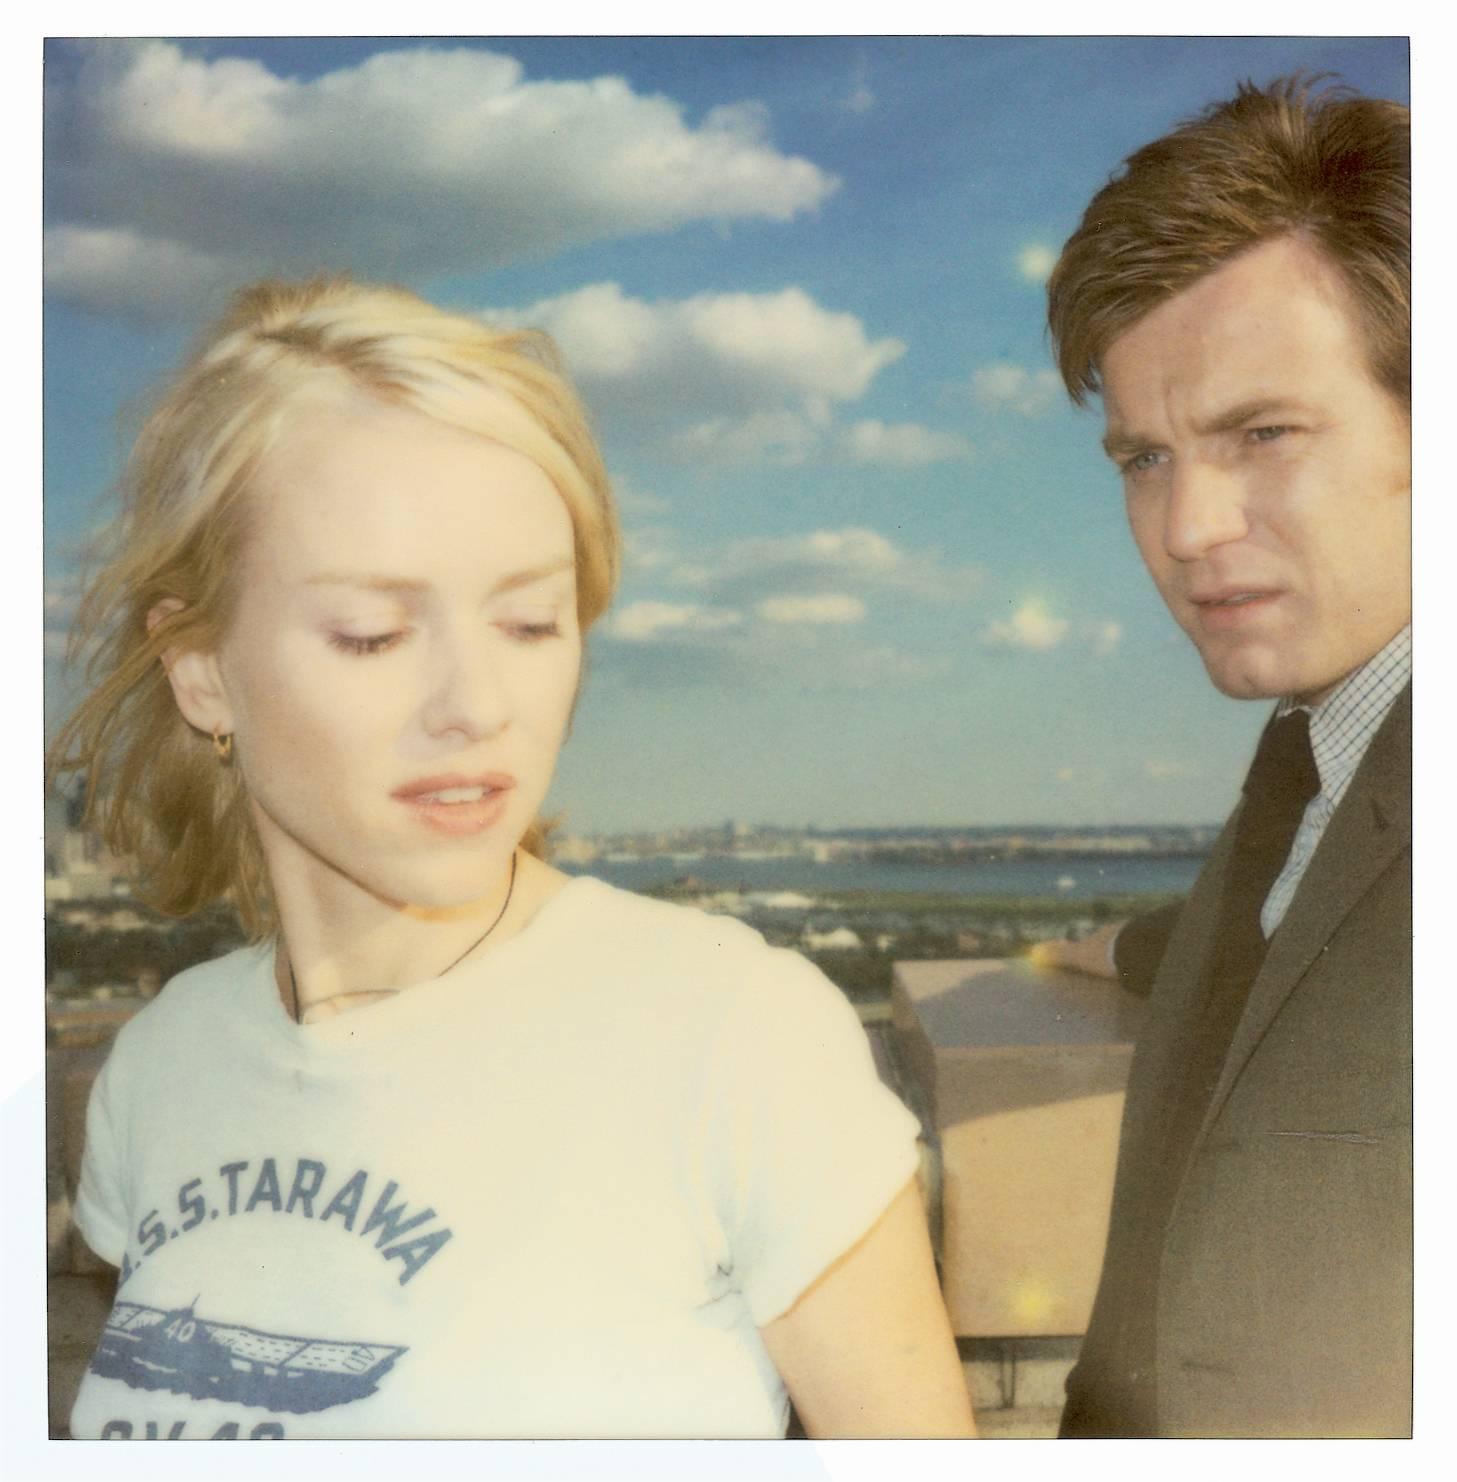 Lila and Sam from the movie Stay with Ewan McGregor, Naomi Watts - Gray Color Photograph by Stefanie Schneider